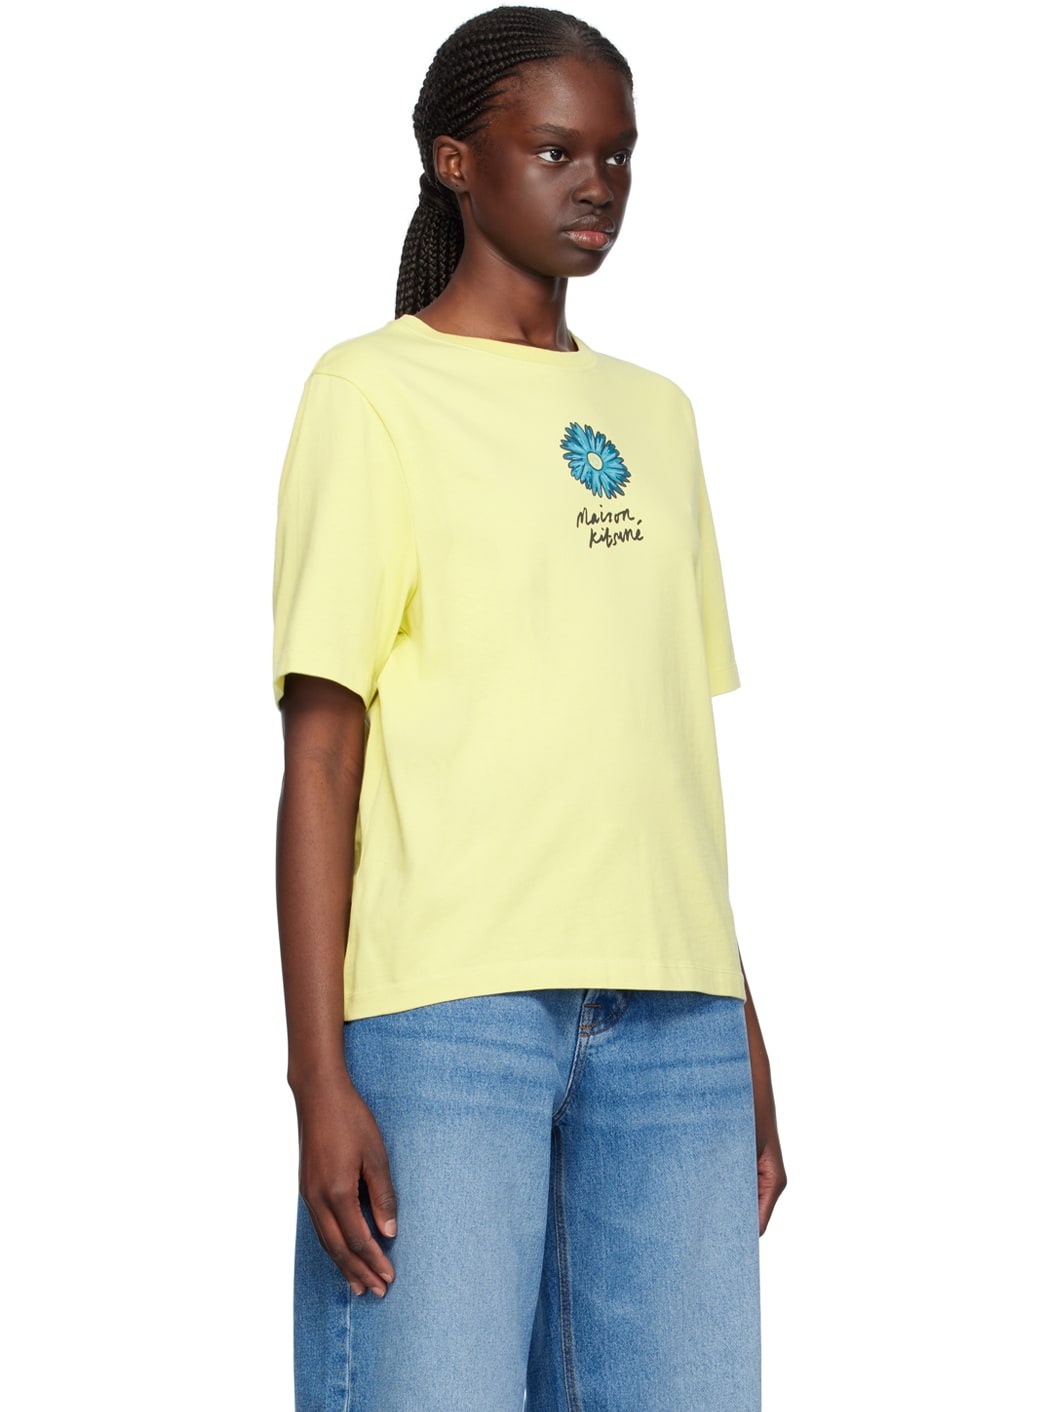 Yellow Floating Flower T-Shirt - 2